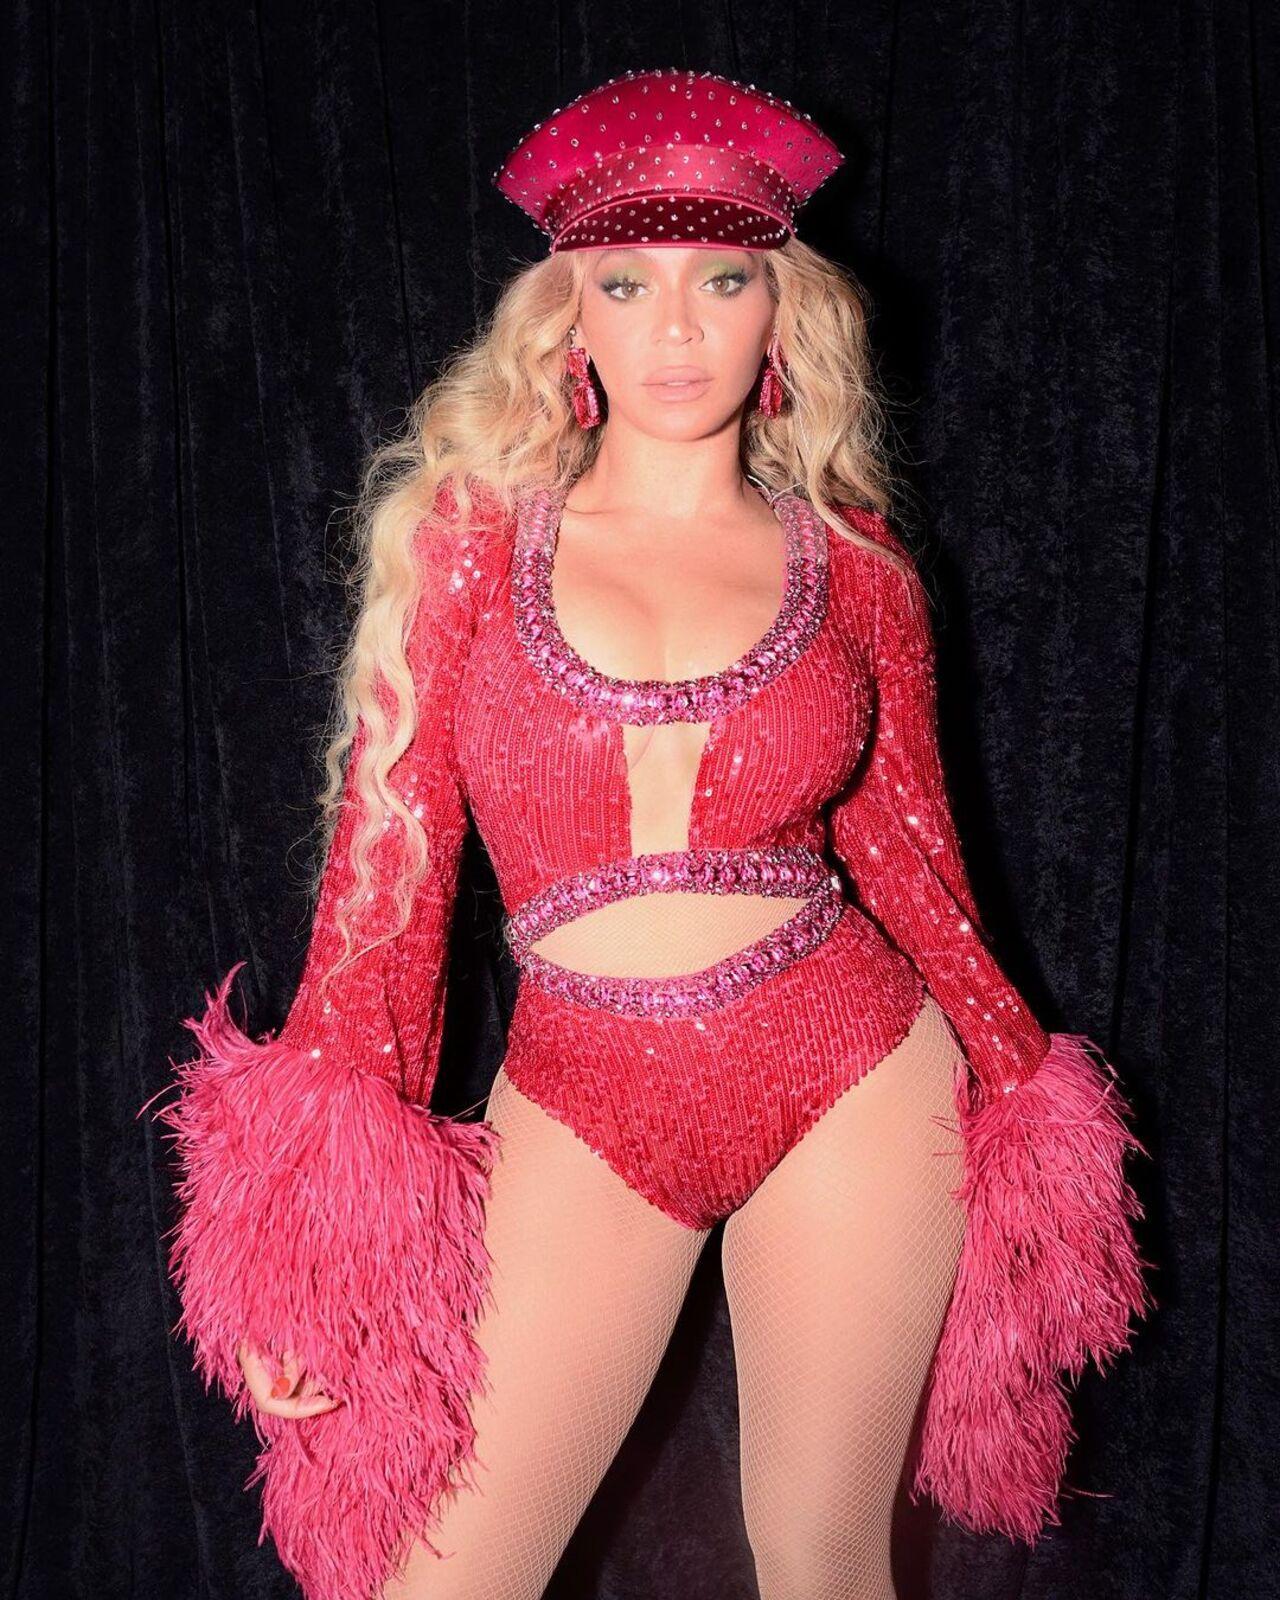 Beyonce exuded sheer power and charisma in her glamorous pink bodysuit with furry confetti-style sleeve ends. With that sensual sailor cap, she is ready to rock!